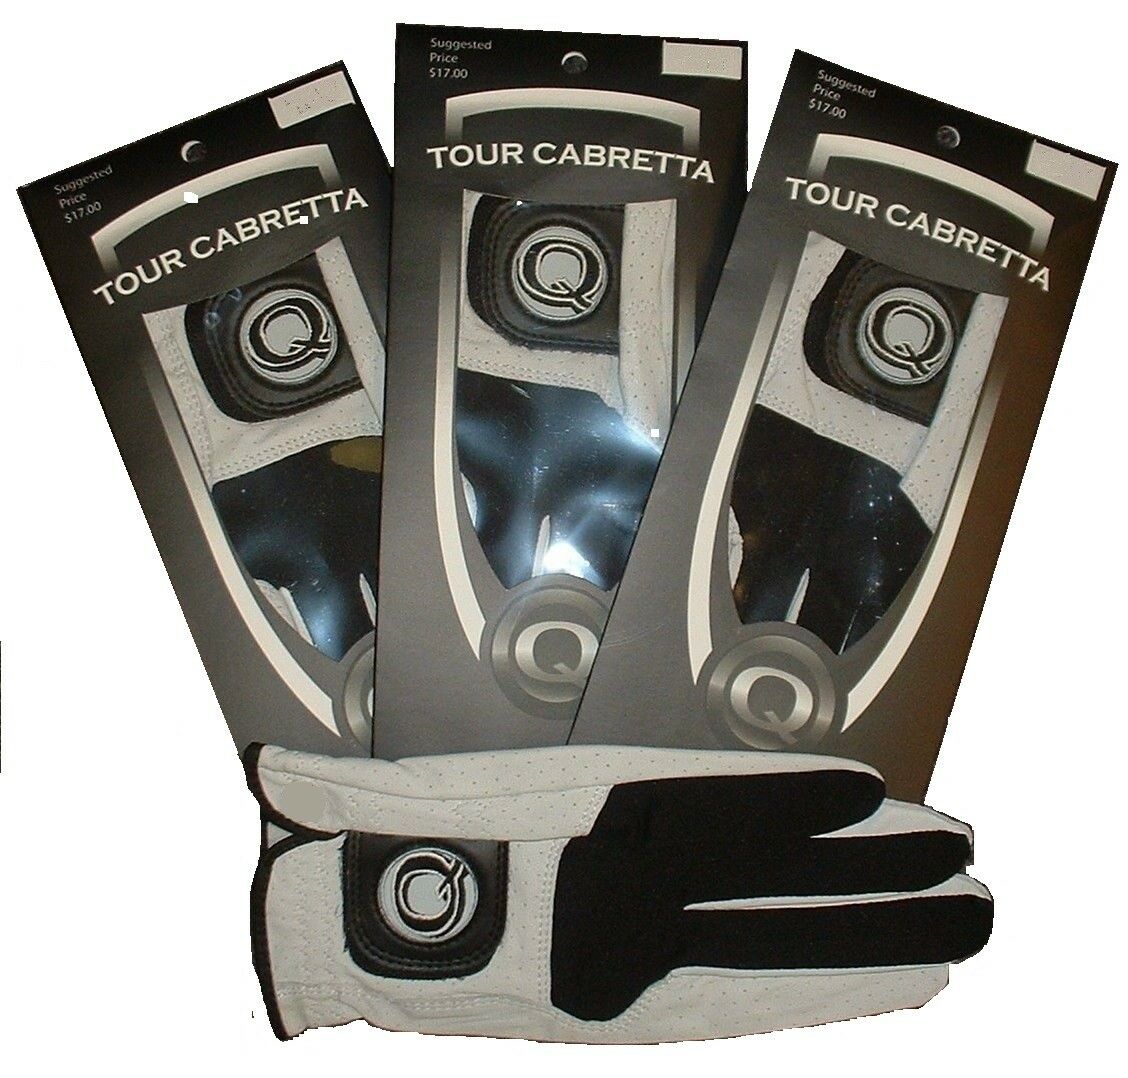 Leather Golf Glove New 3 Pack Genuine Cabretta Q Super Soft Many Sizes Available